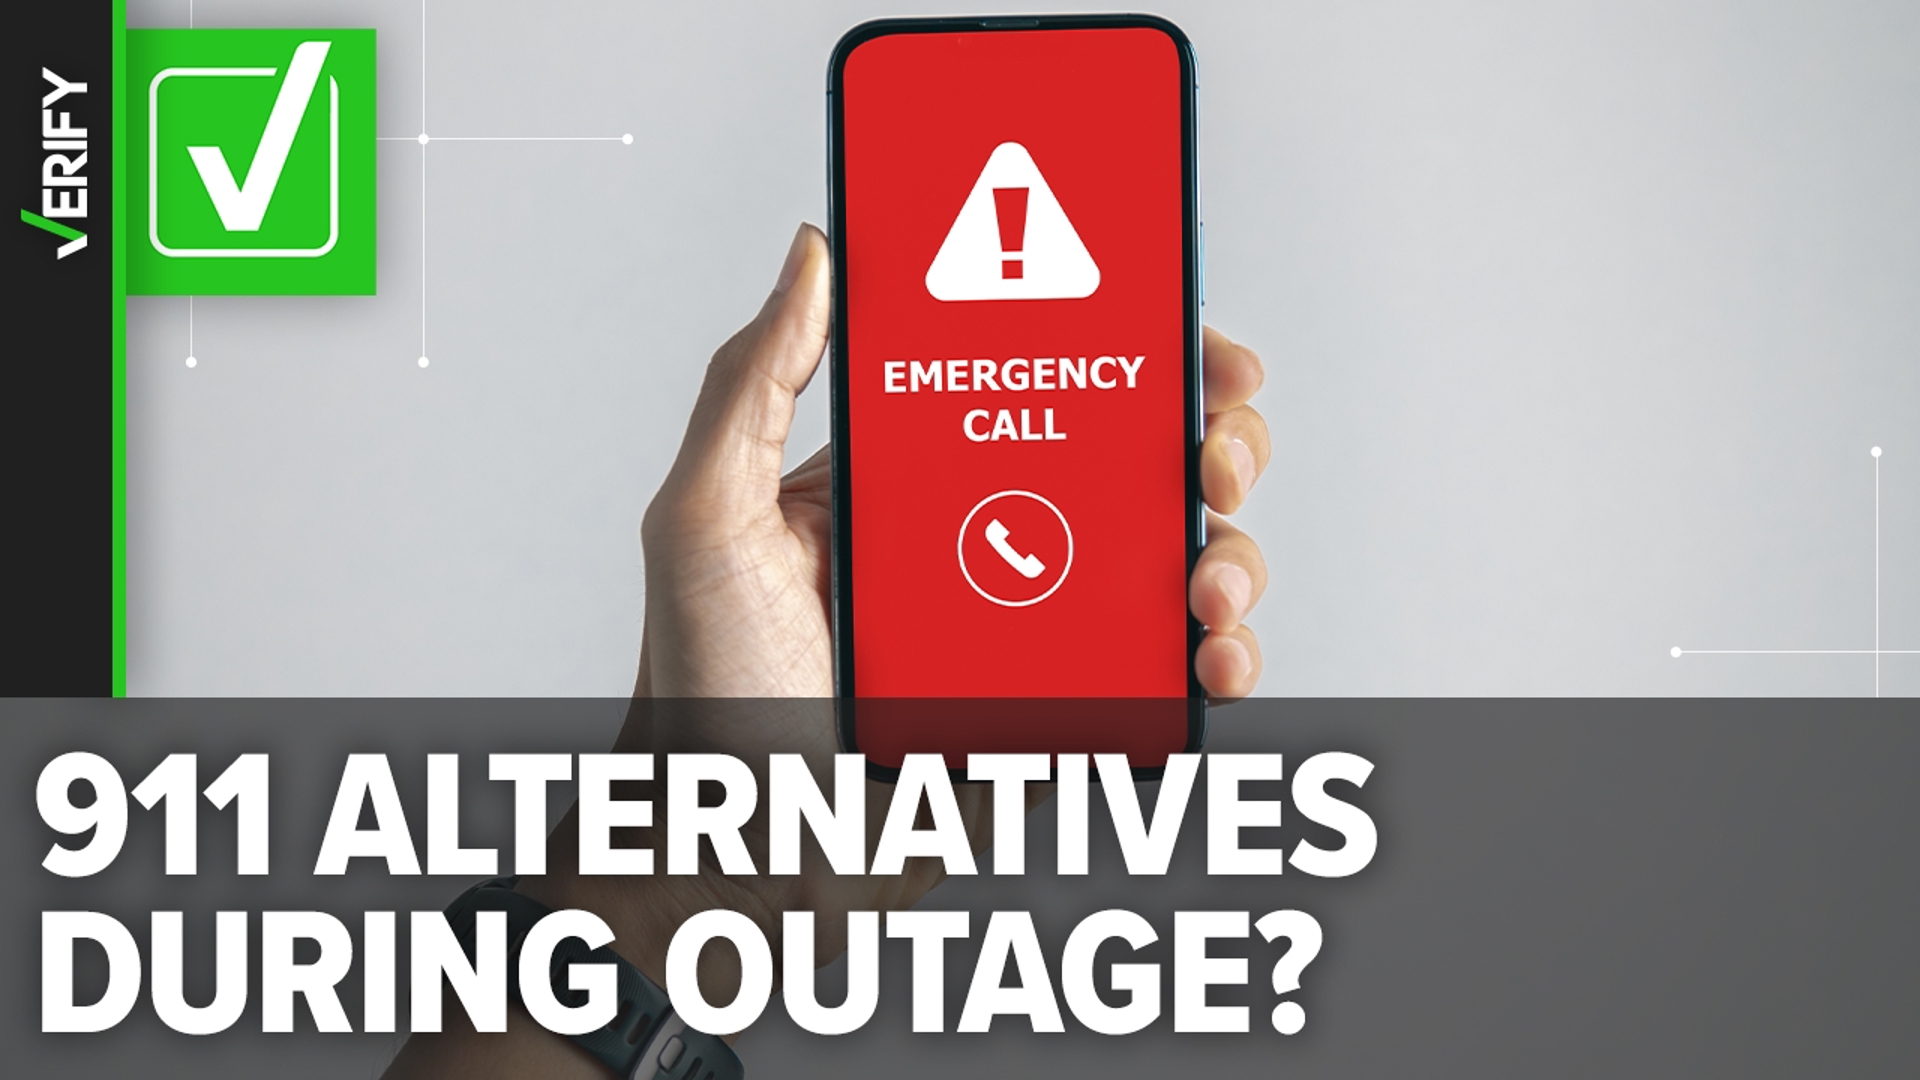 If you cannot call 911 during an outage, there are other ways to reach them, such as calling non-emergency or alternative numbers, or sending a text to 911.